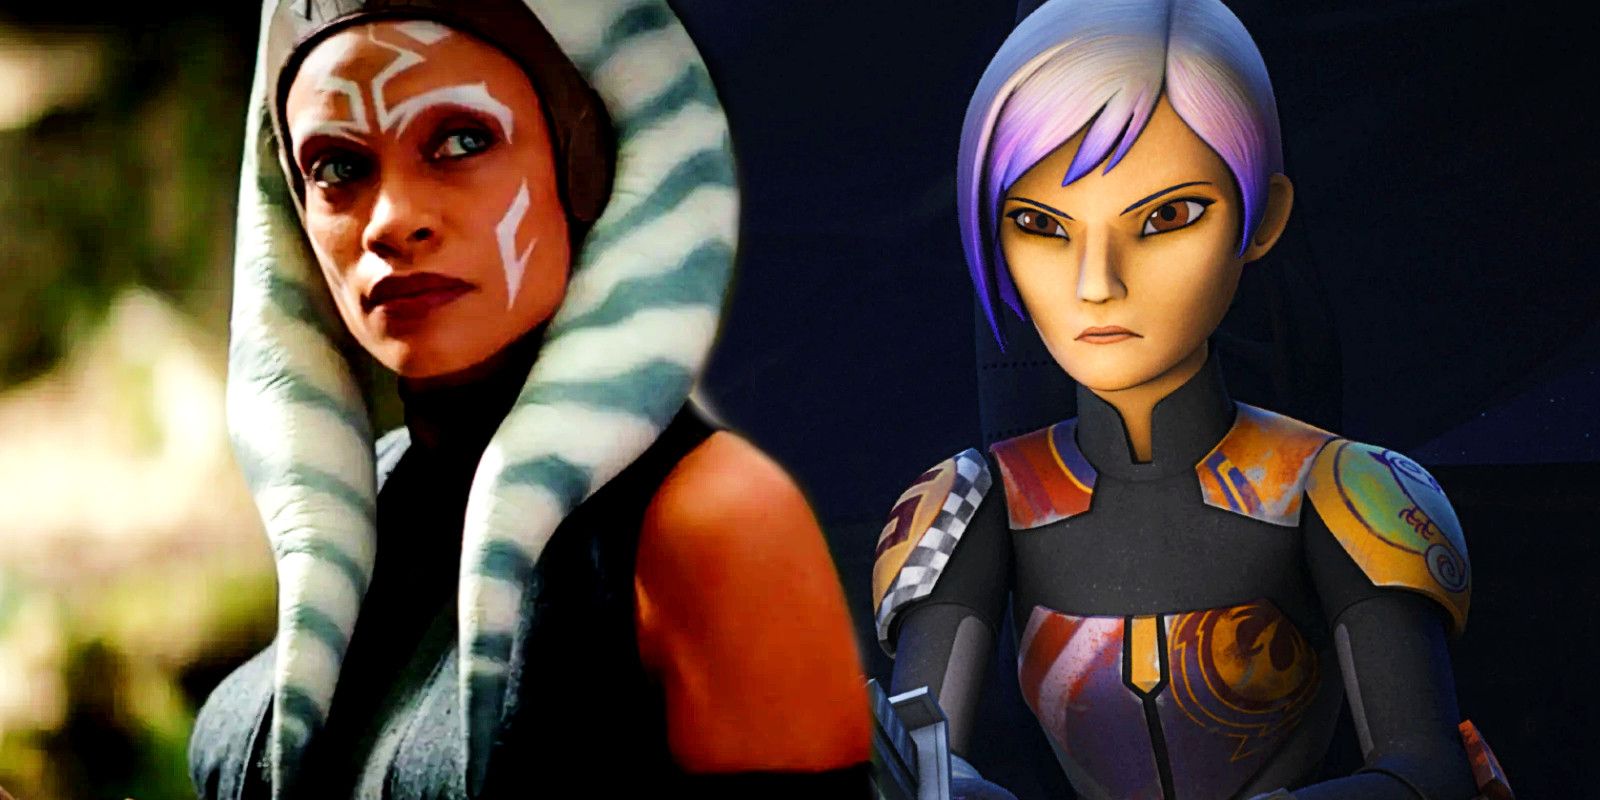 Star Wars live-action Ahsoka Tano on the left, animated Sabine Wren on the right 